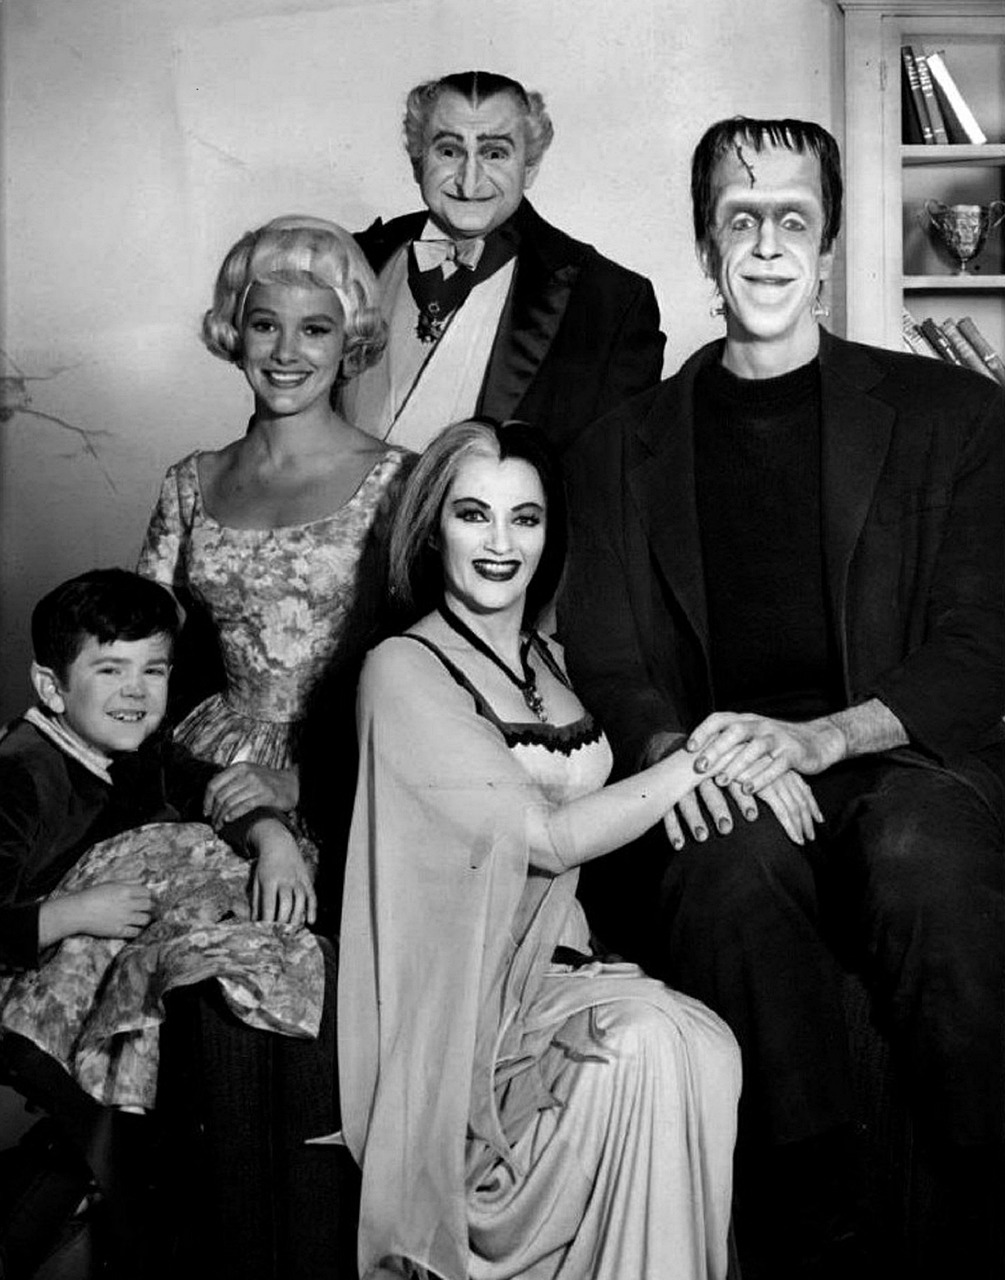 munsters butch patrick beverly owen free photo